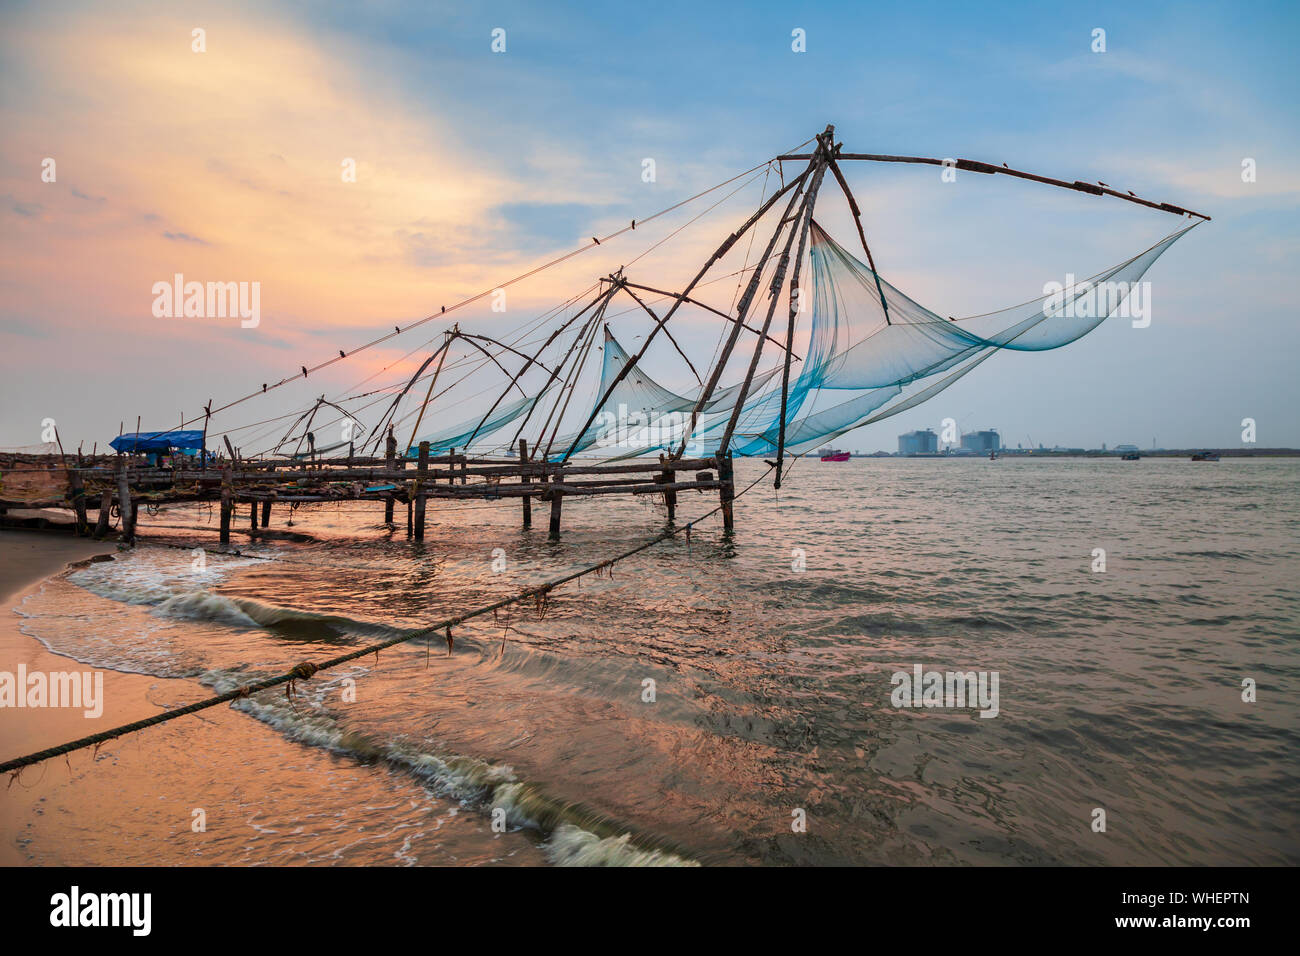 Chinese fishing nets or cheena vala are a type of stationary lift net, located in Fort Kochi in Cochin, India Stock Photo